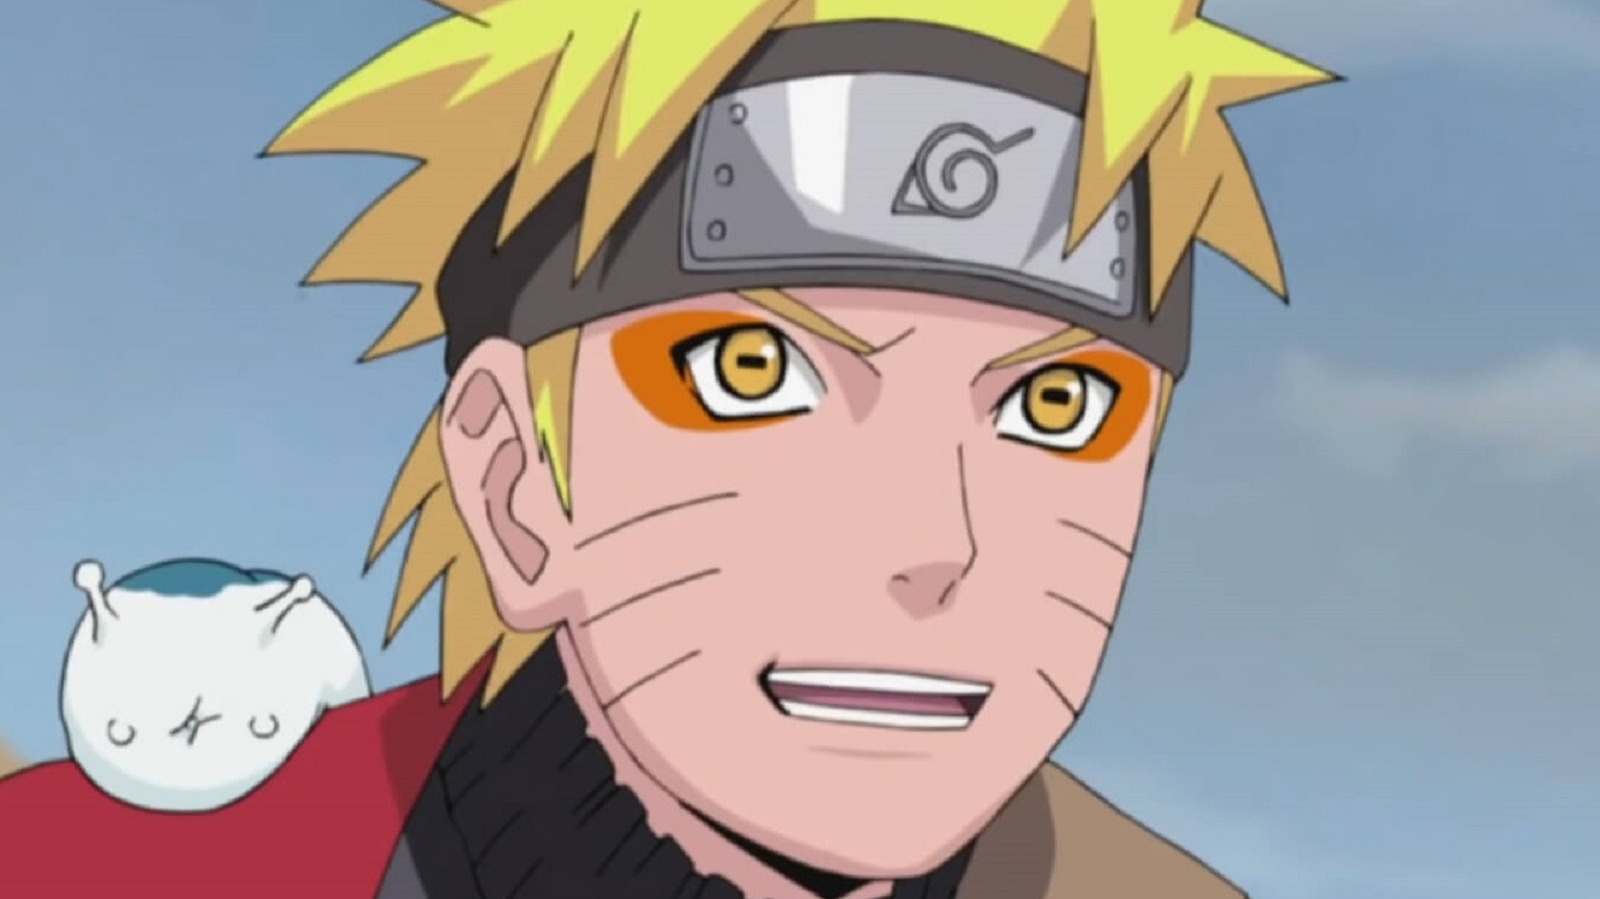 18 Worst Episodes Of Naruto Shippuden Are Listed Here! -